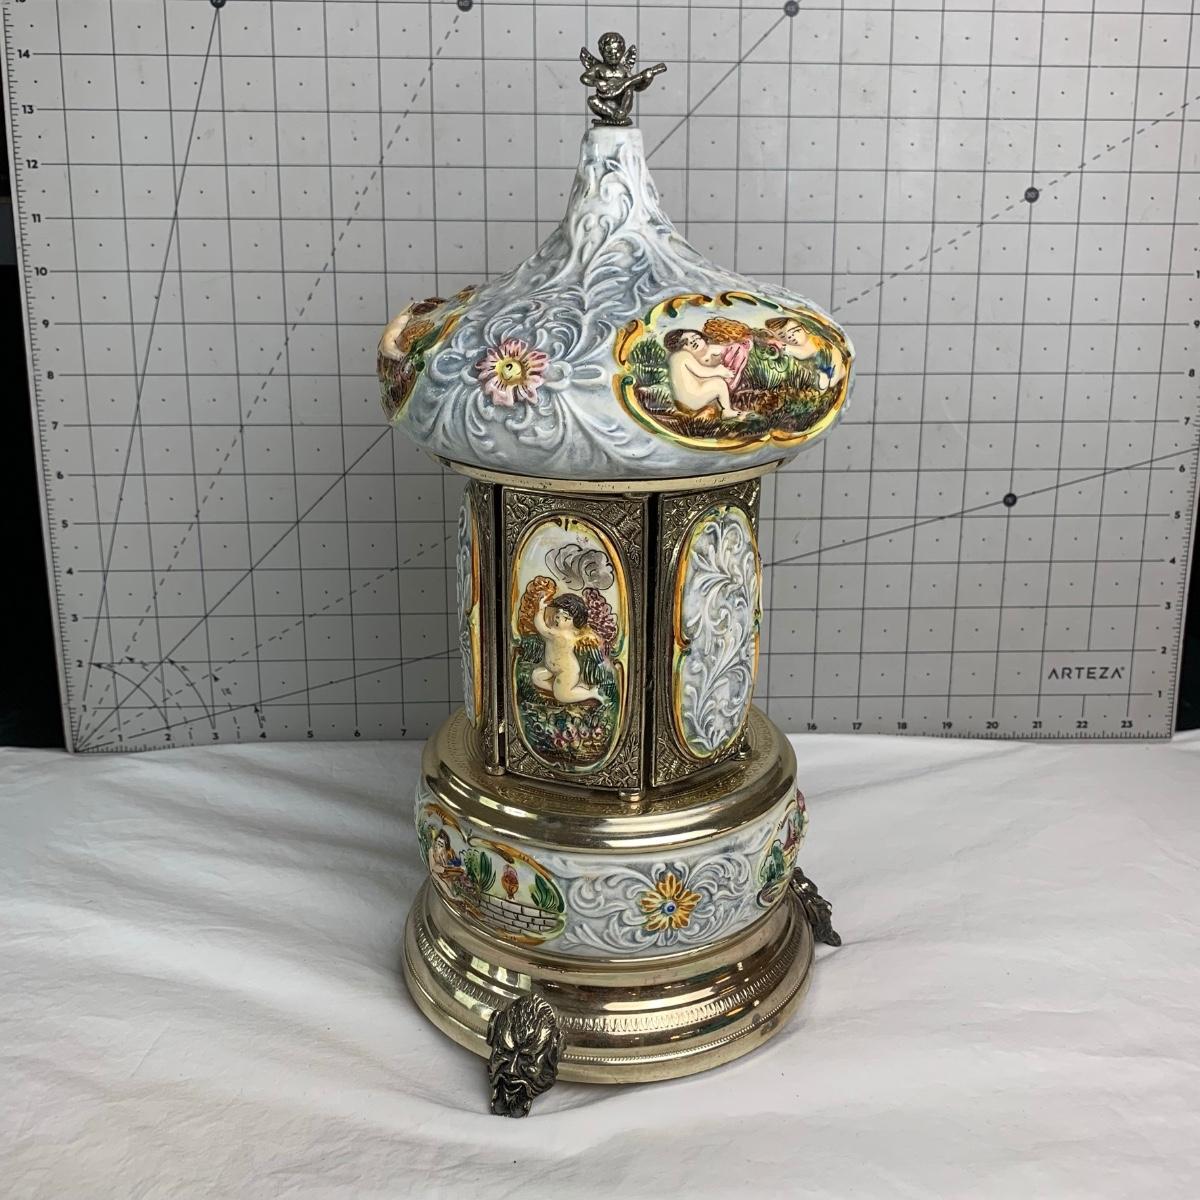 Sold at Auction: Vintage Reuge Music Box Carousel / Made in Italy